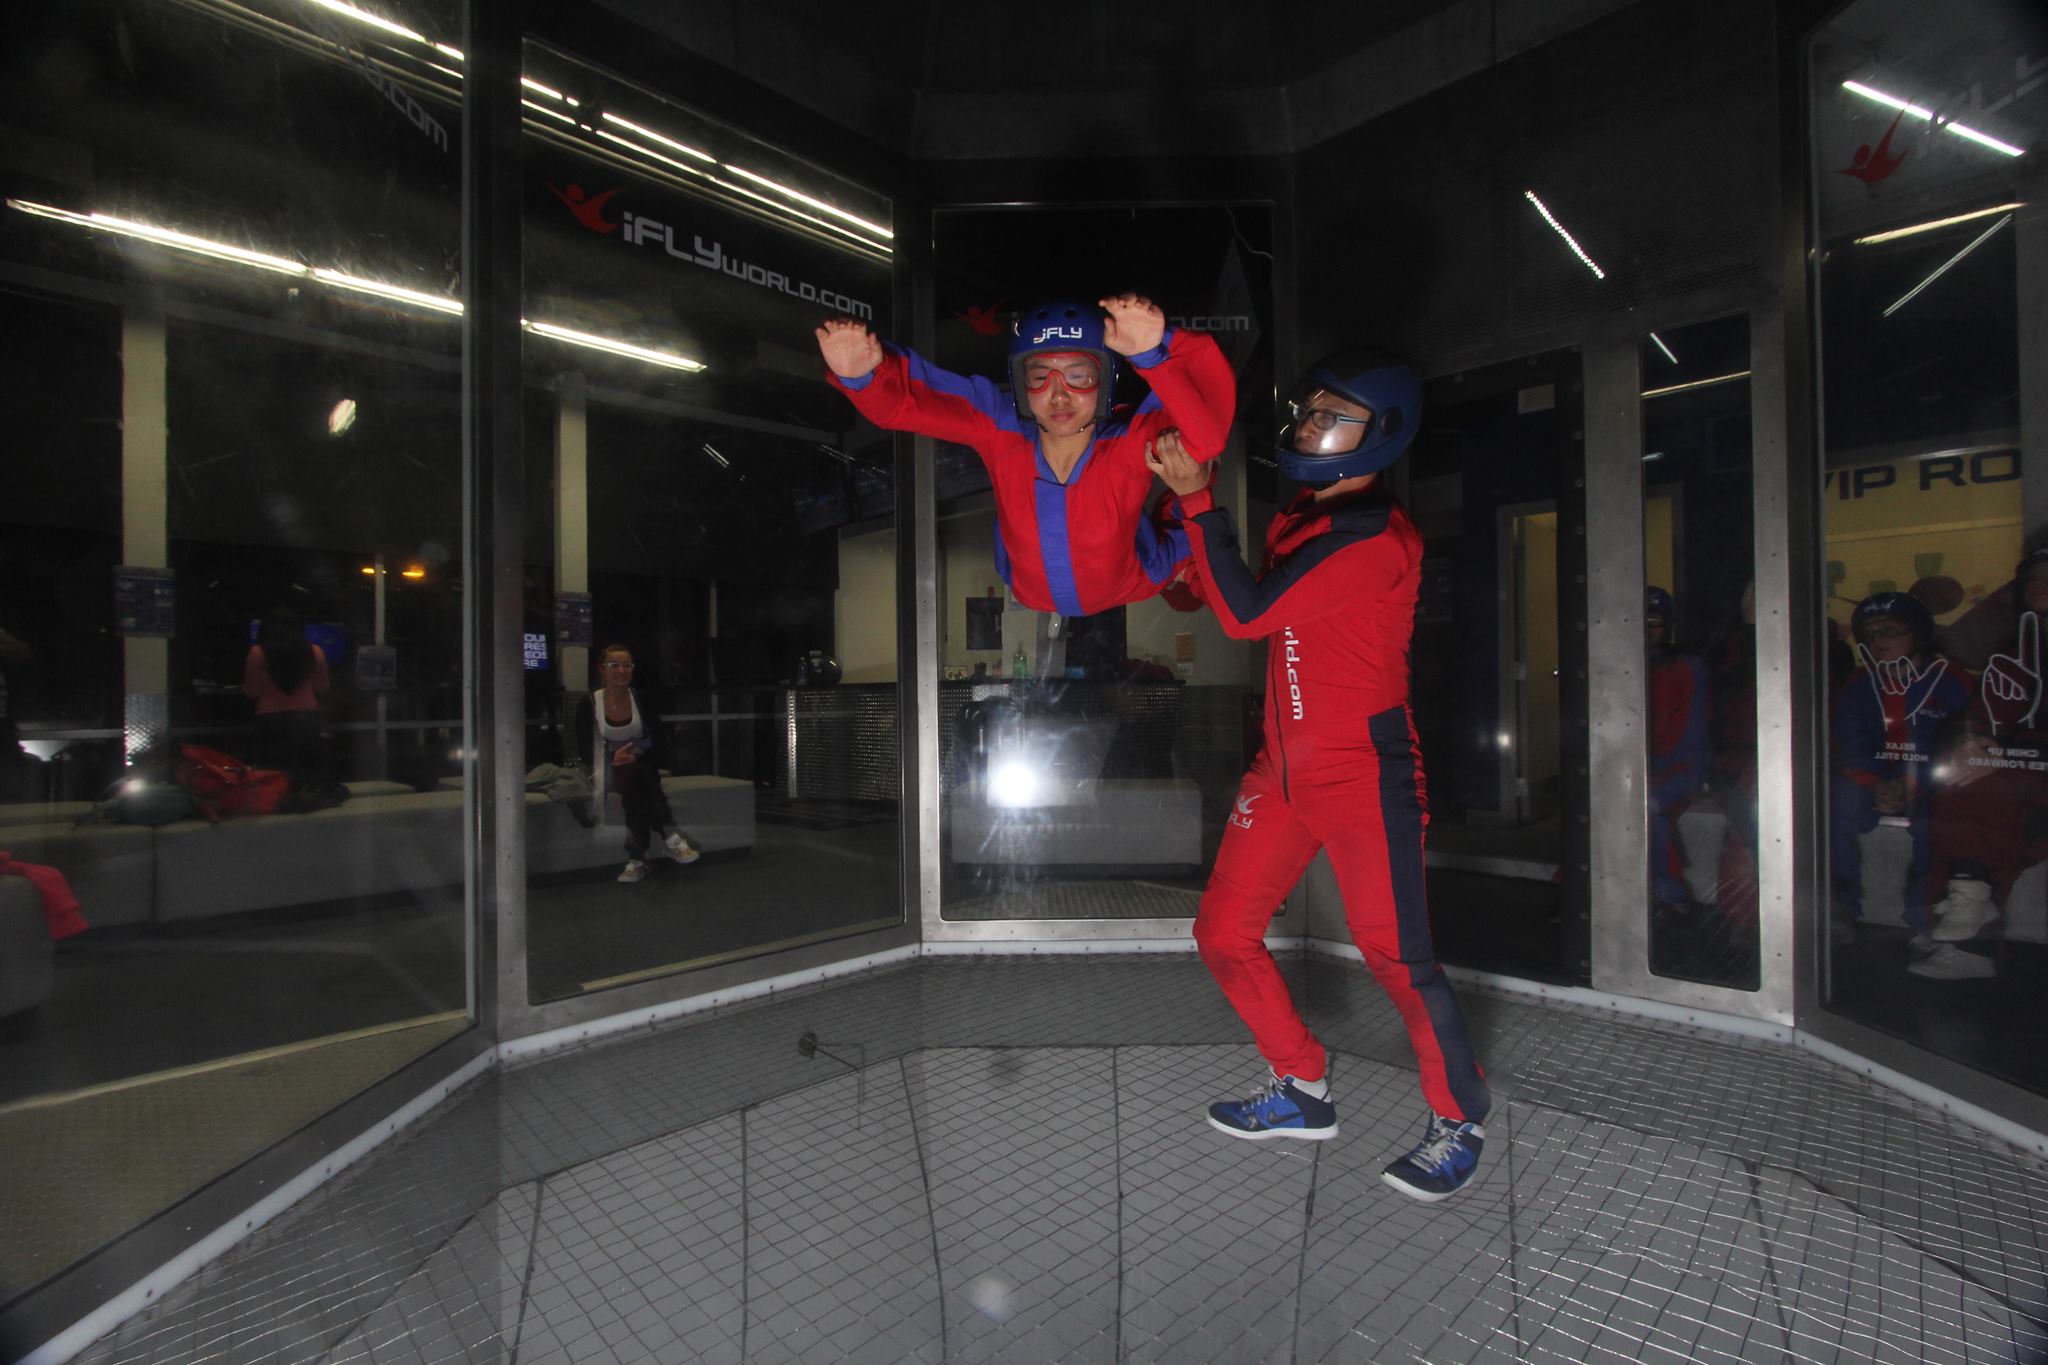 Charlene flying in an indoor wind tunnel with an instructor holding on to her.